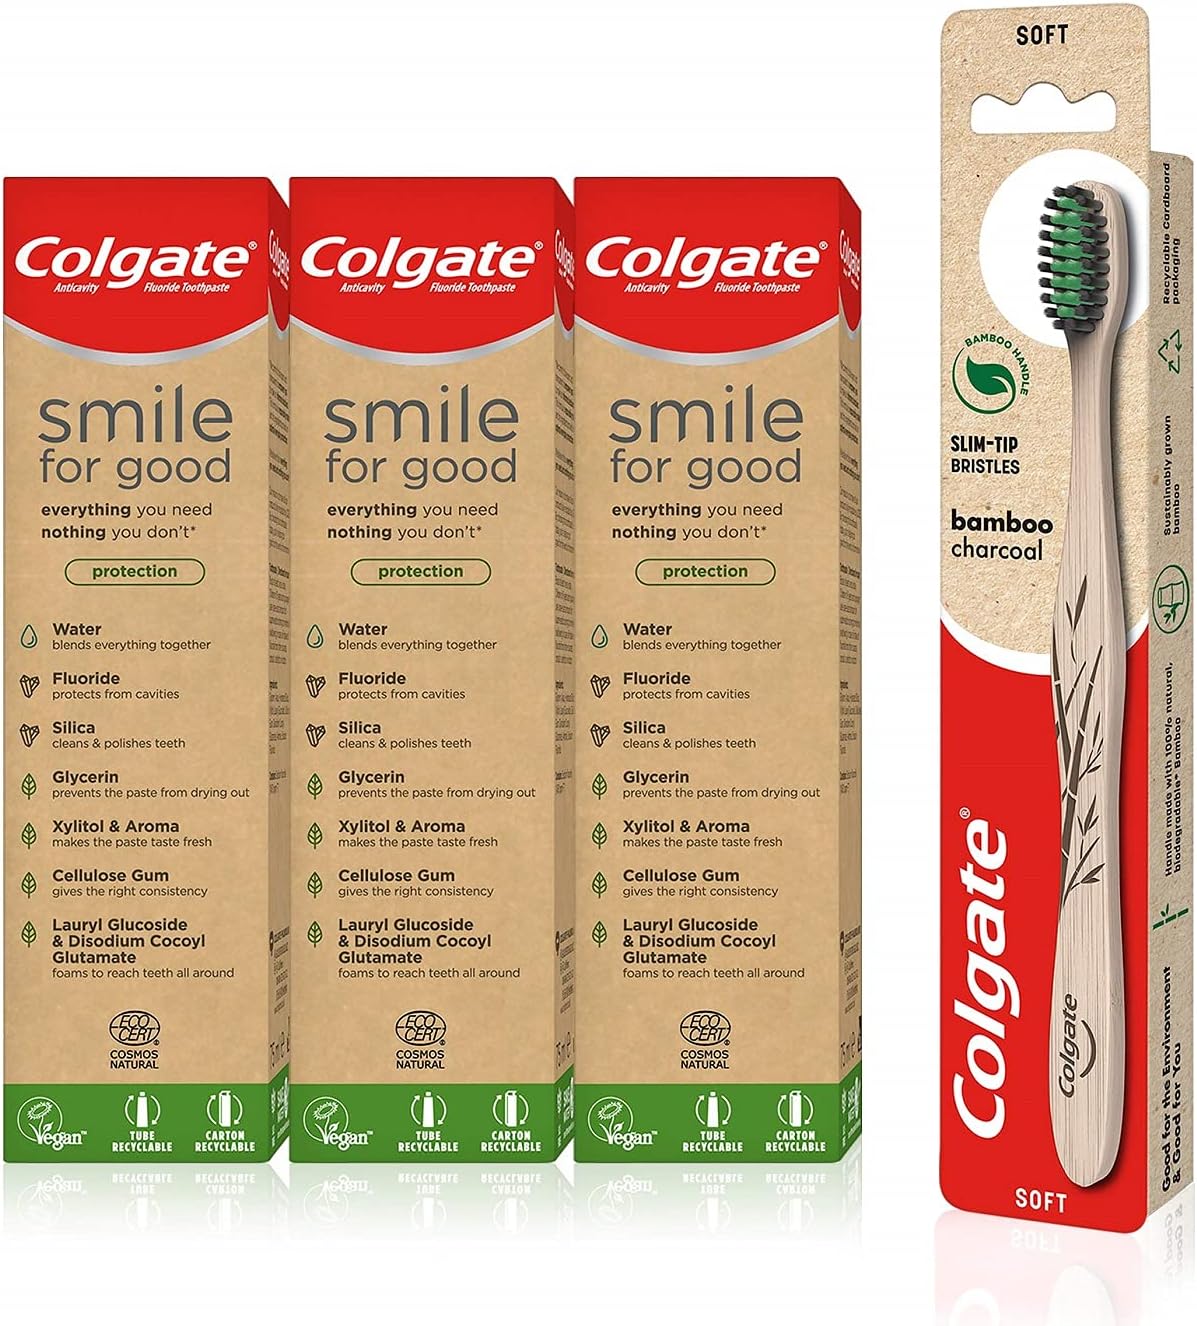 Colgate Bamboo Charcoal Toothbrush & Smile for Good Toothpaste 75ml 3 Pack RRP 19.99 CLEARANCE XL 14.99